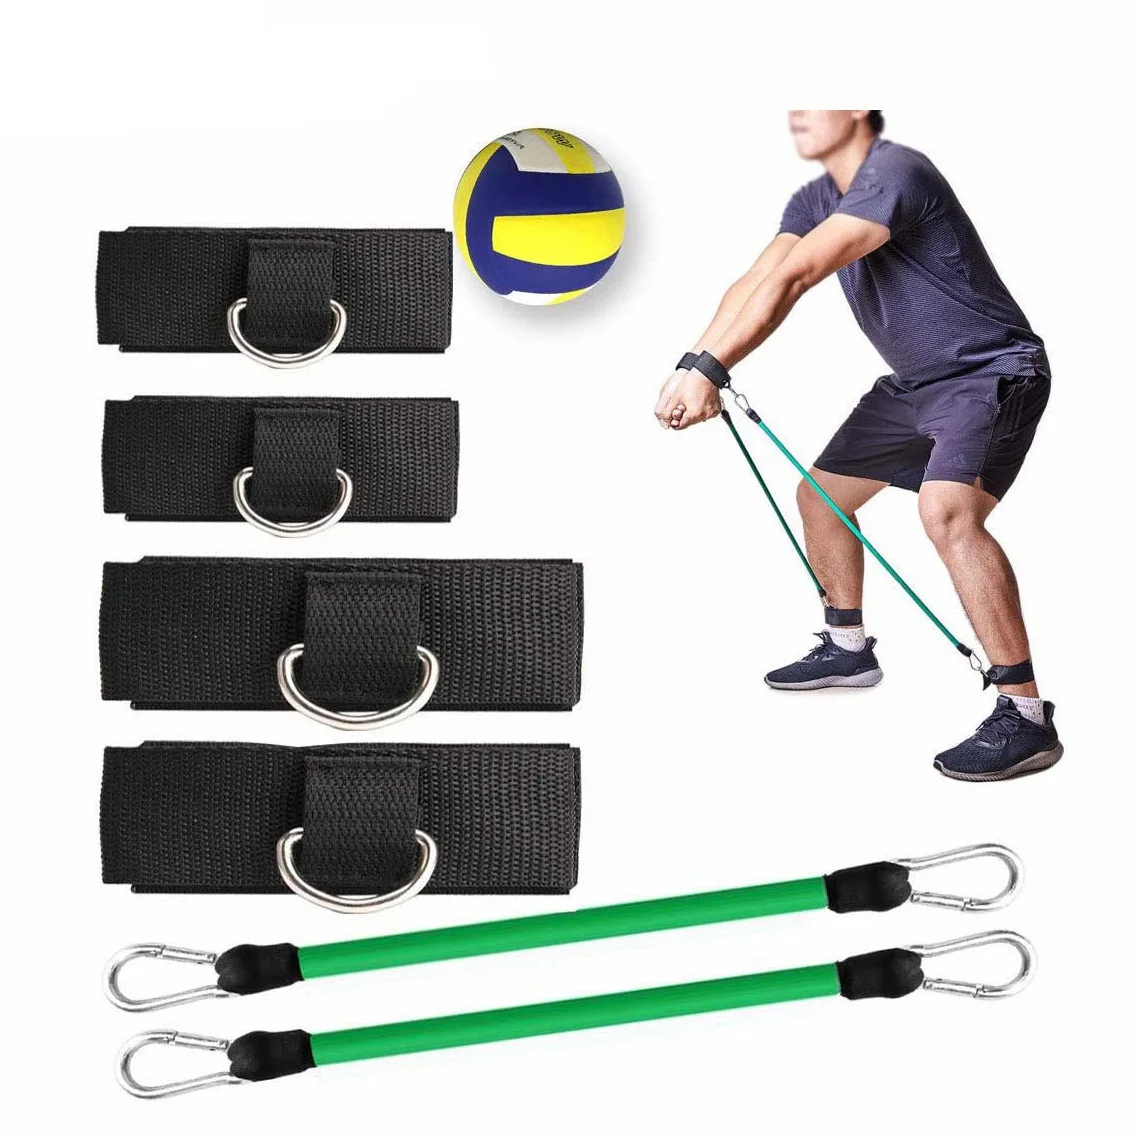 

2021 New Volleyball Training Aid Resistance Volleyball Training Belt Great Trainer To Prevent Excessive Upward Arm Movement -40